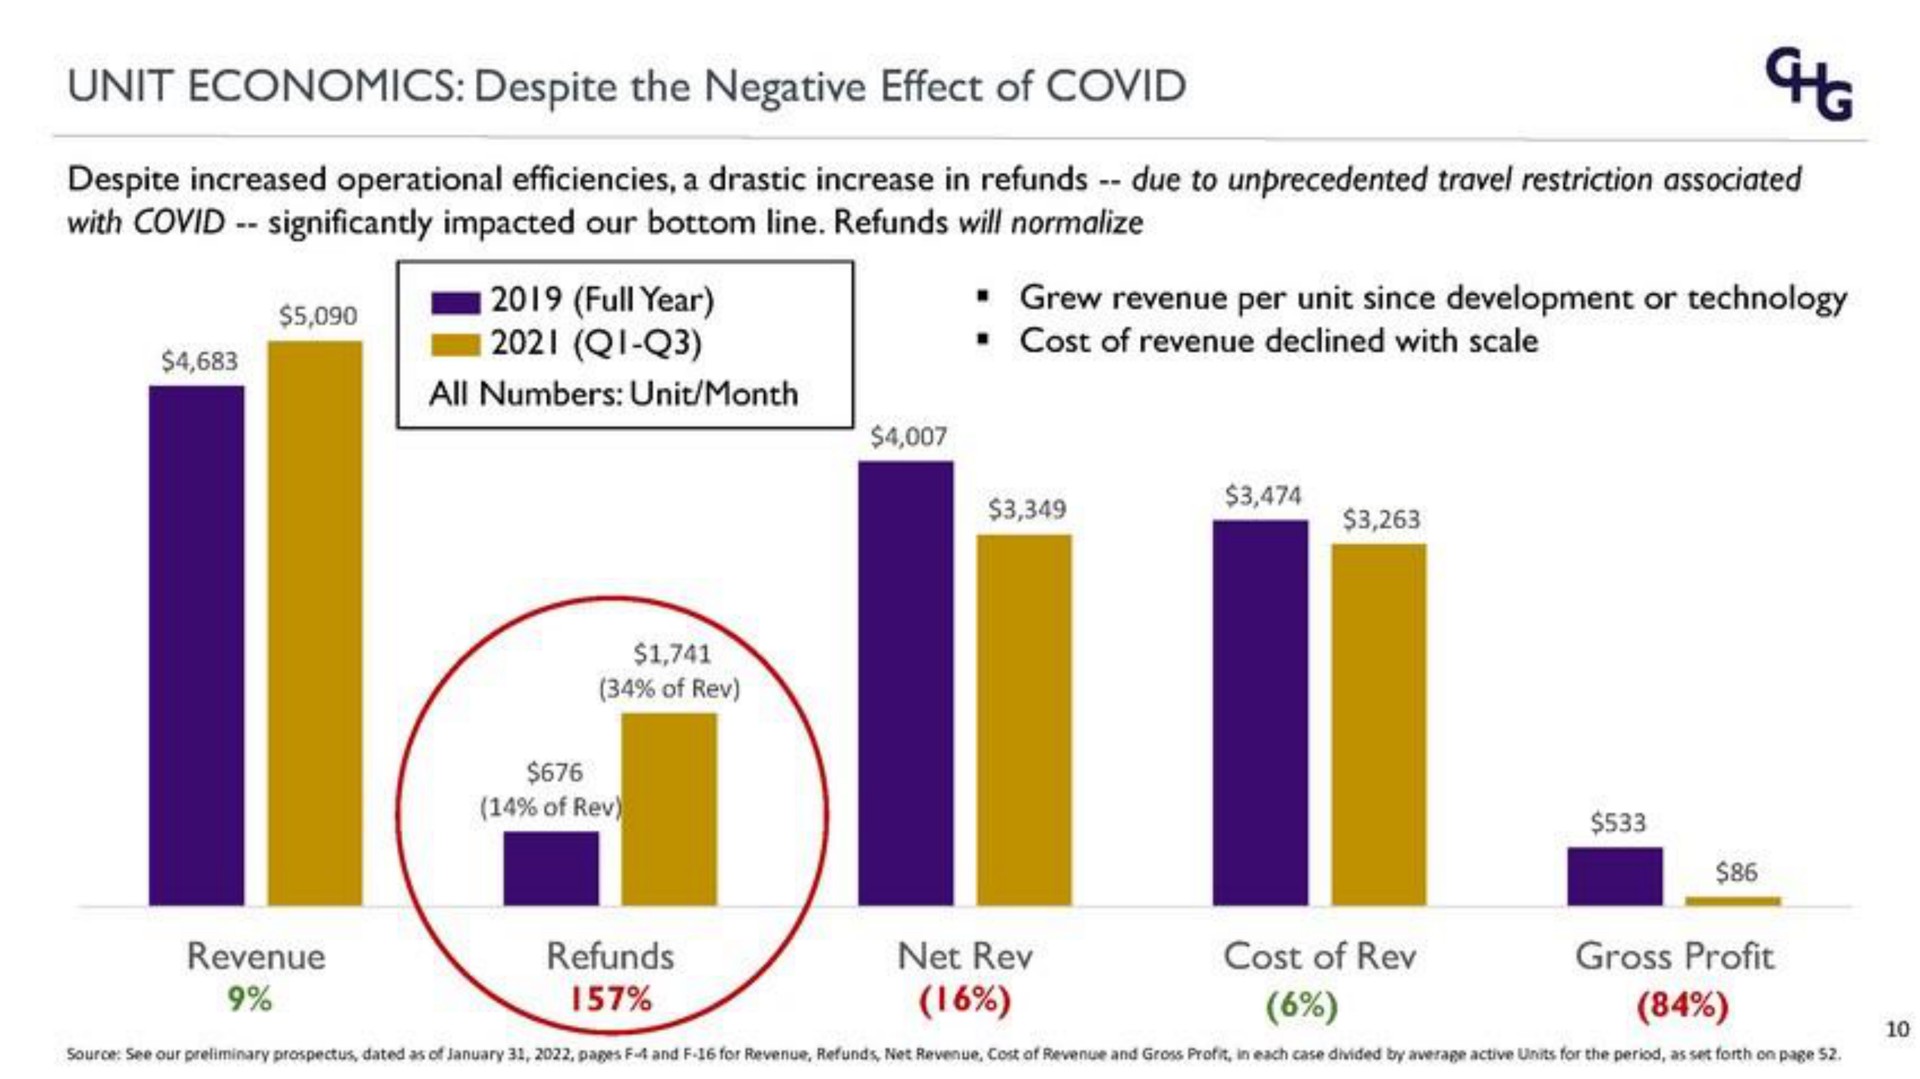 unit economics despite the negative effect of covid despite increased operational efficiencies a drastic increase in refunds due to unprecedented travel restriction associated with covid significantly impacted our bottom line refunds will normalize grew revenue per unit since development or technology cost of revenue declined with scale mag full year | Corphousing Group